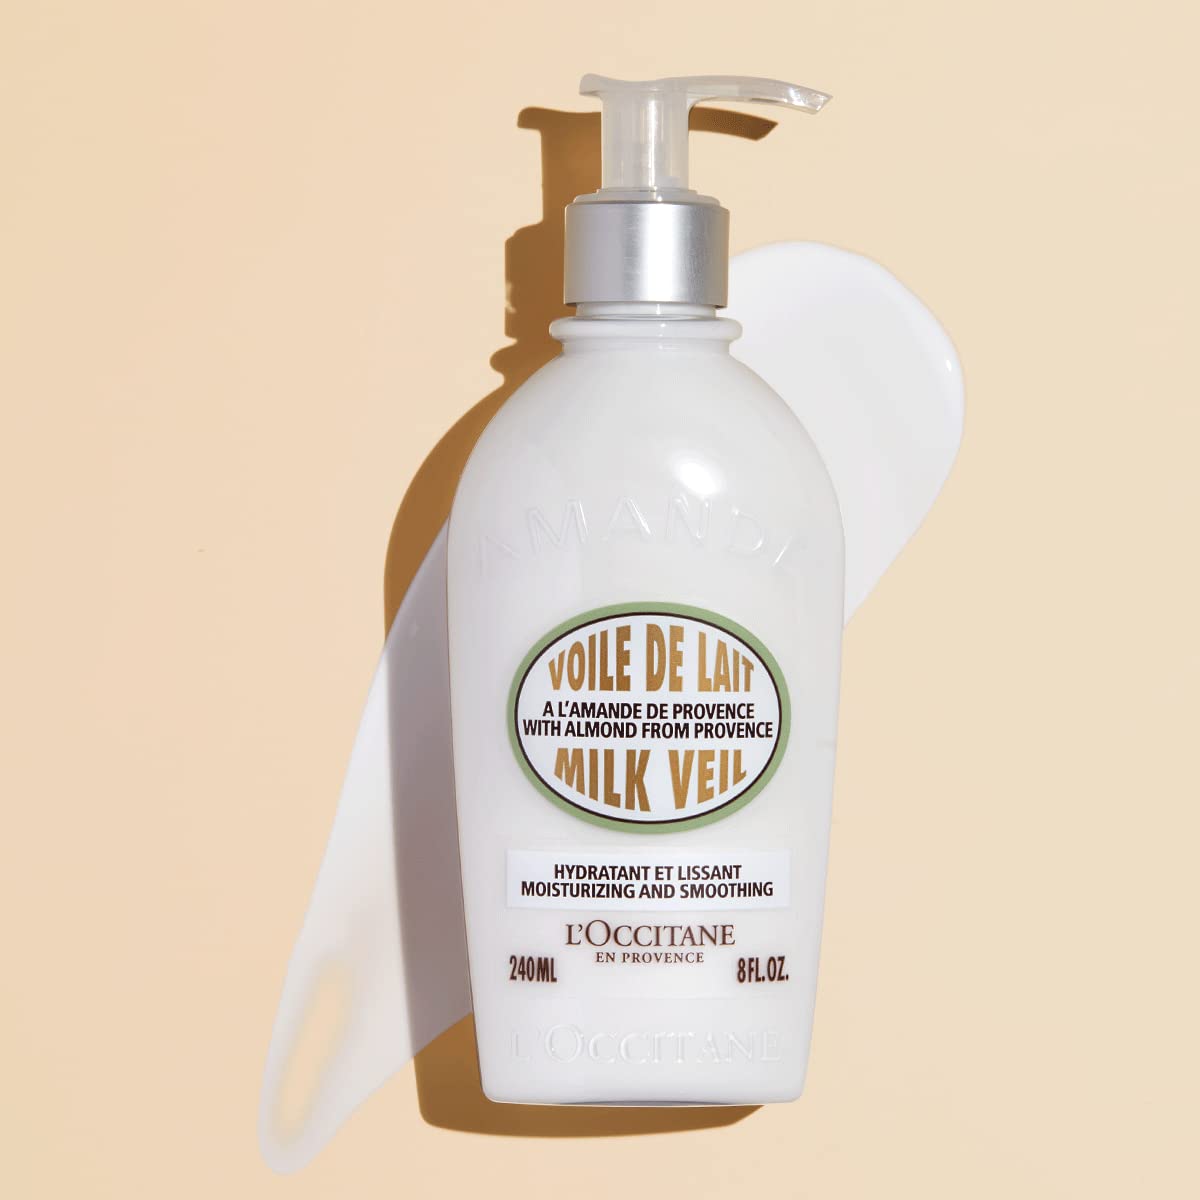 L'Occitane Moisturizing, Softening Almond Milk Veil 8.4 oz: Infused with Almond Oil, Visibly Firmer-Looking Skin, Smooth Skin, 24-Hour Hydration*